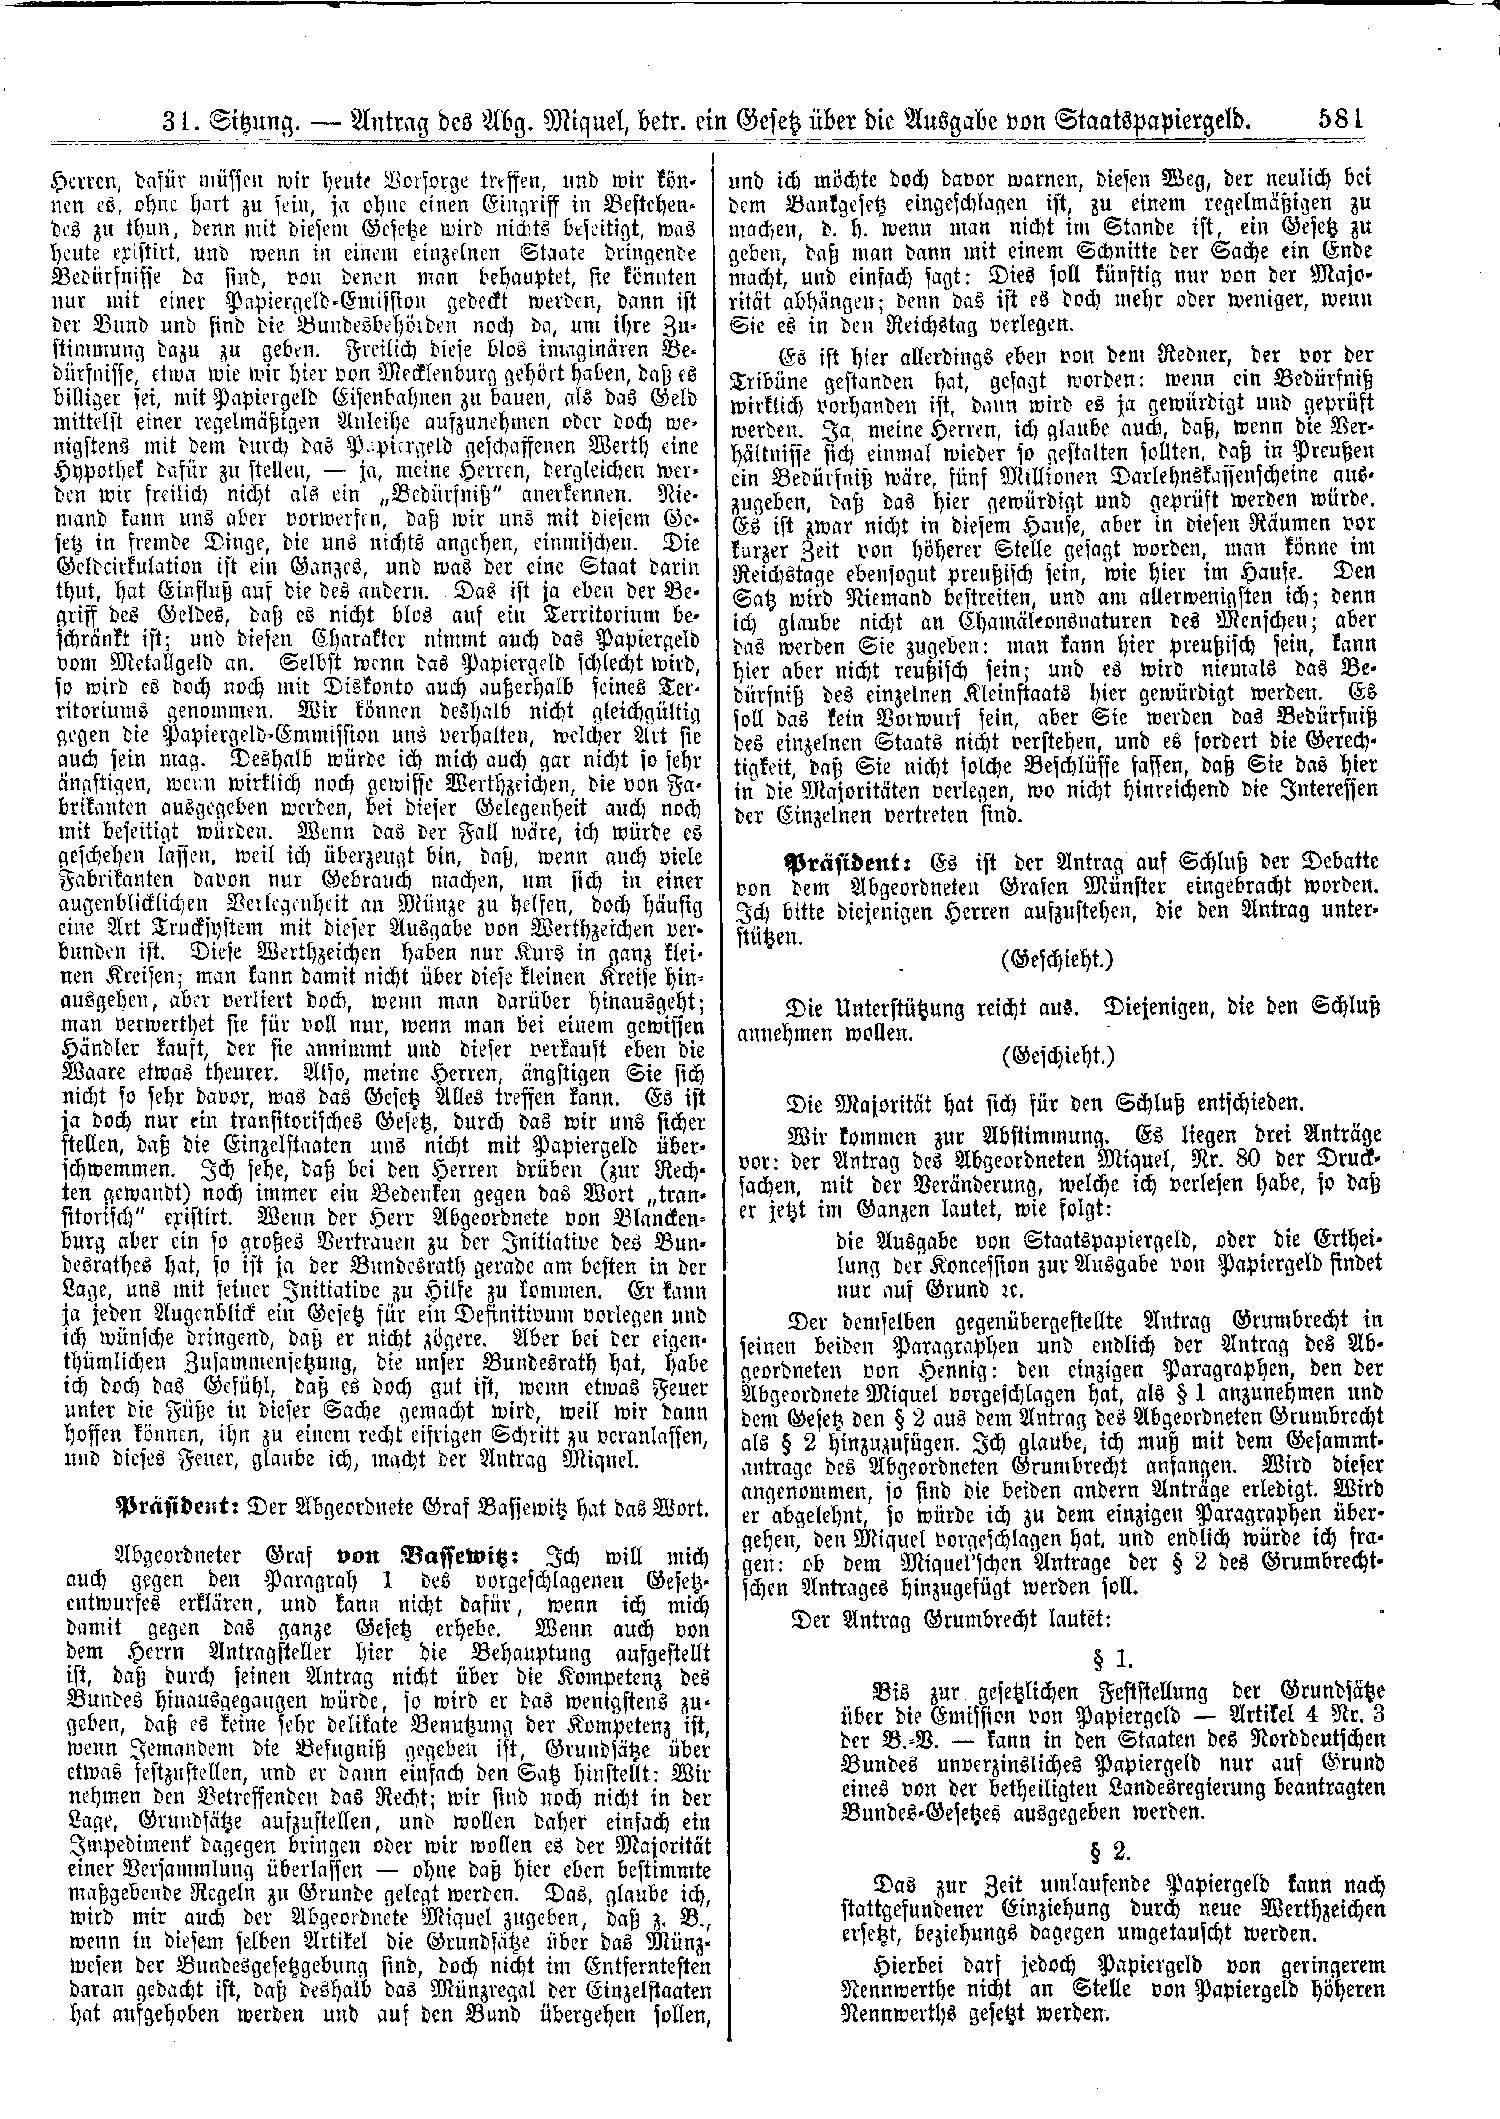 Scan of page 581